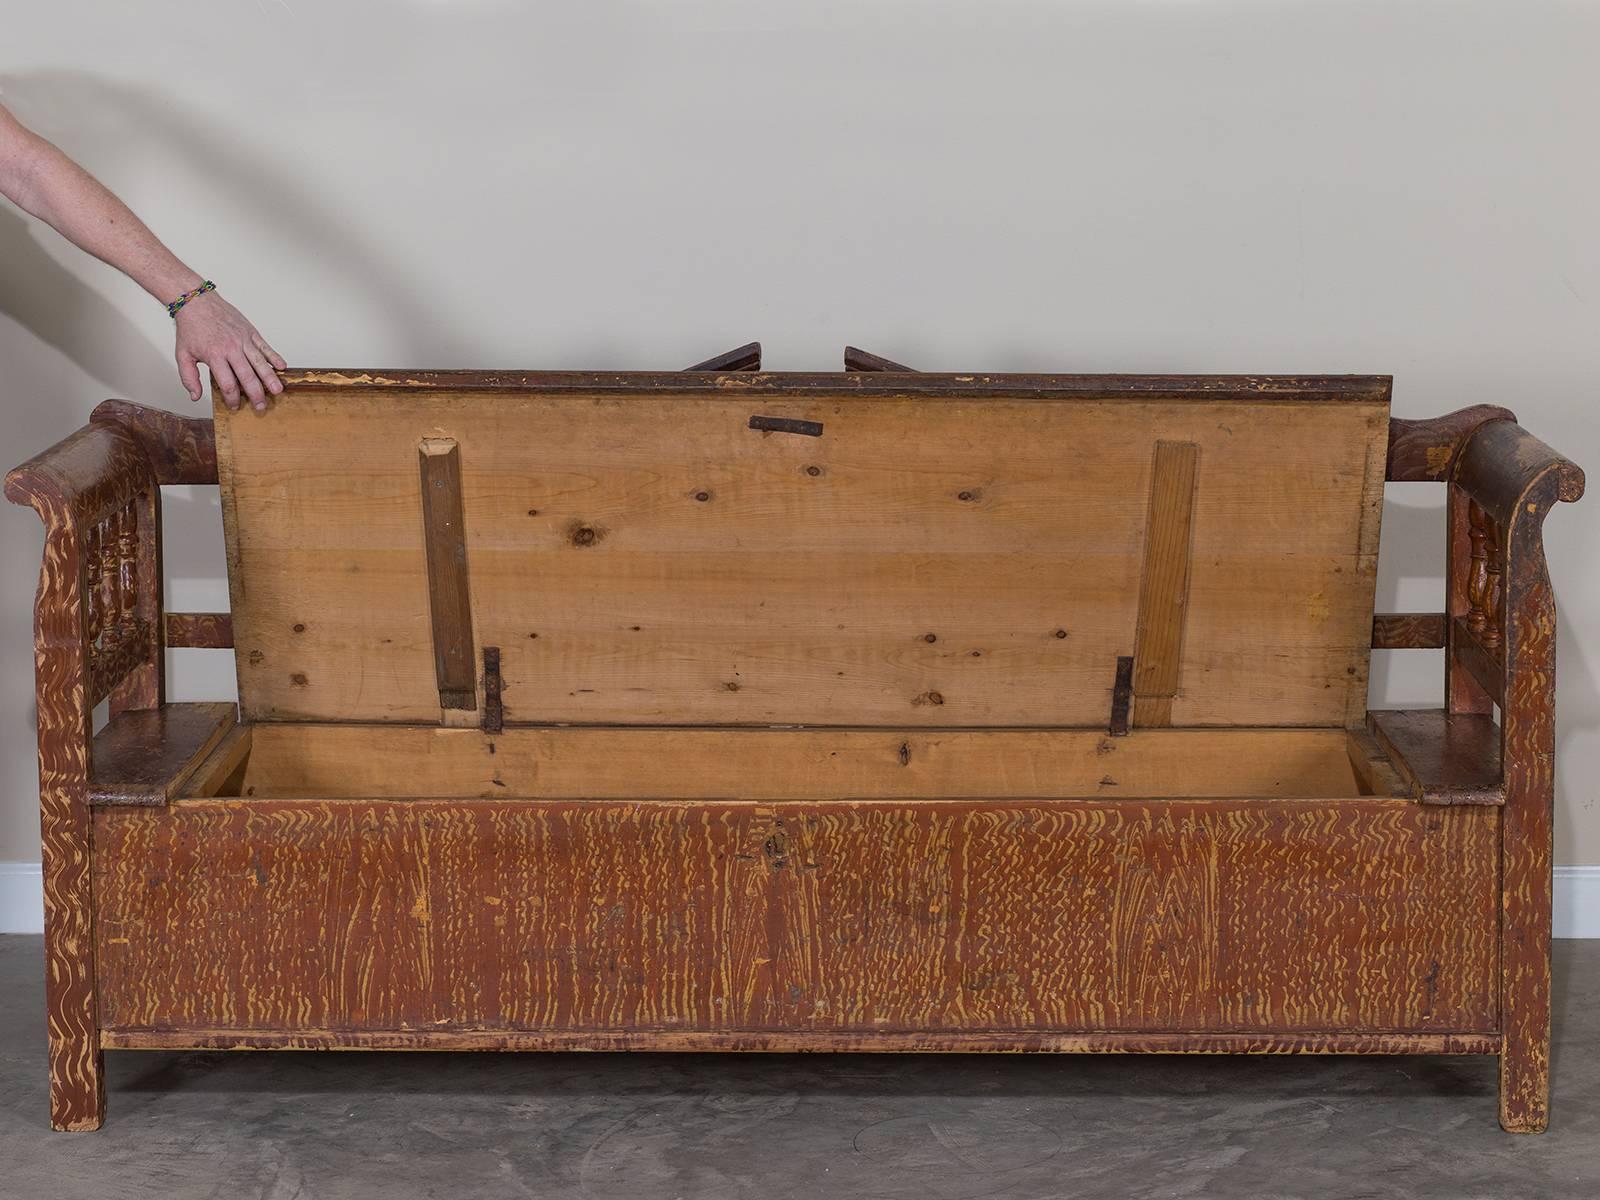 Hungarian Romanian Antique Painted Pine Bench, circa 1875 For Sale 2